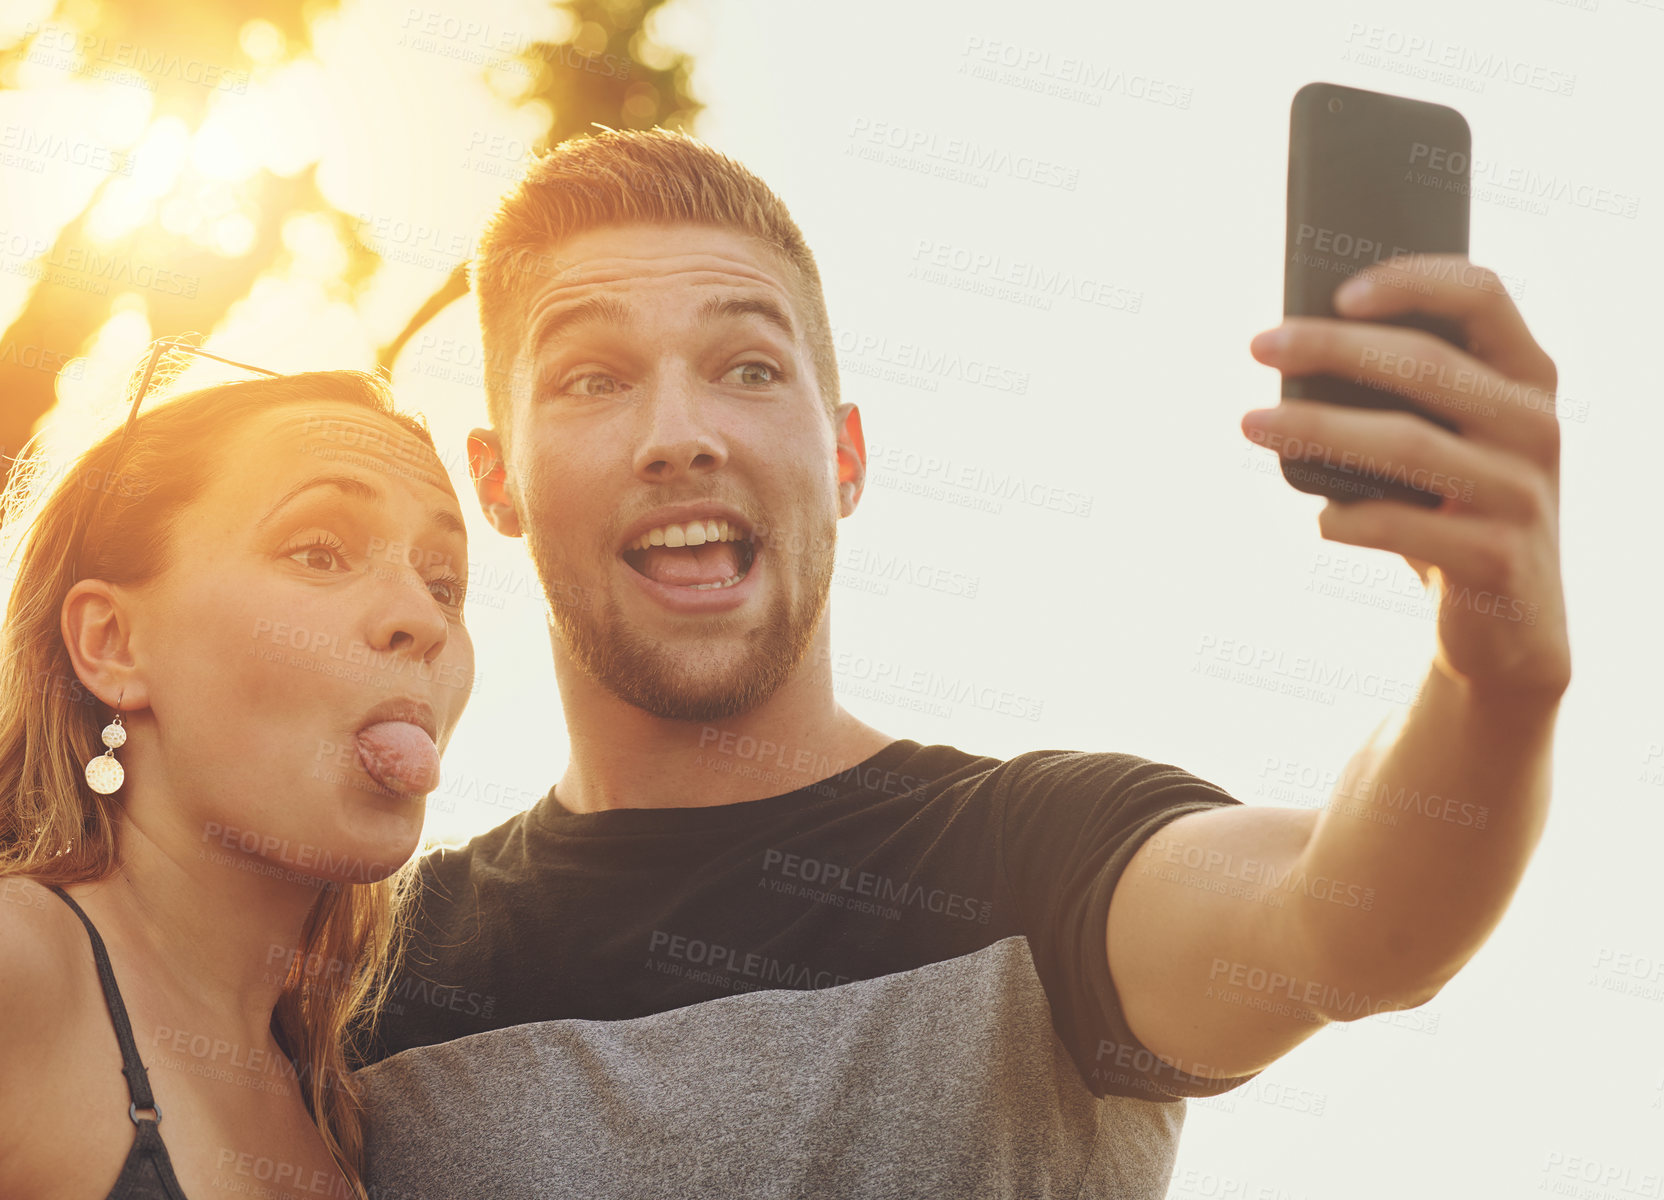 Buy stock photo Shot of a silly young couple posing for a selfie together outside